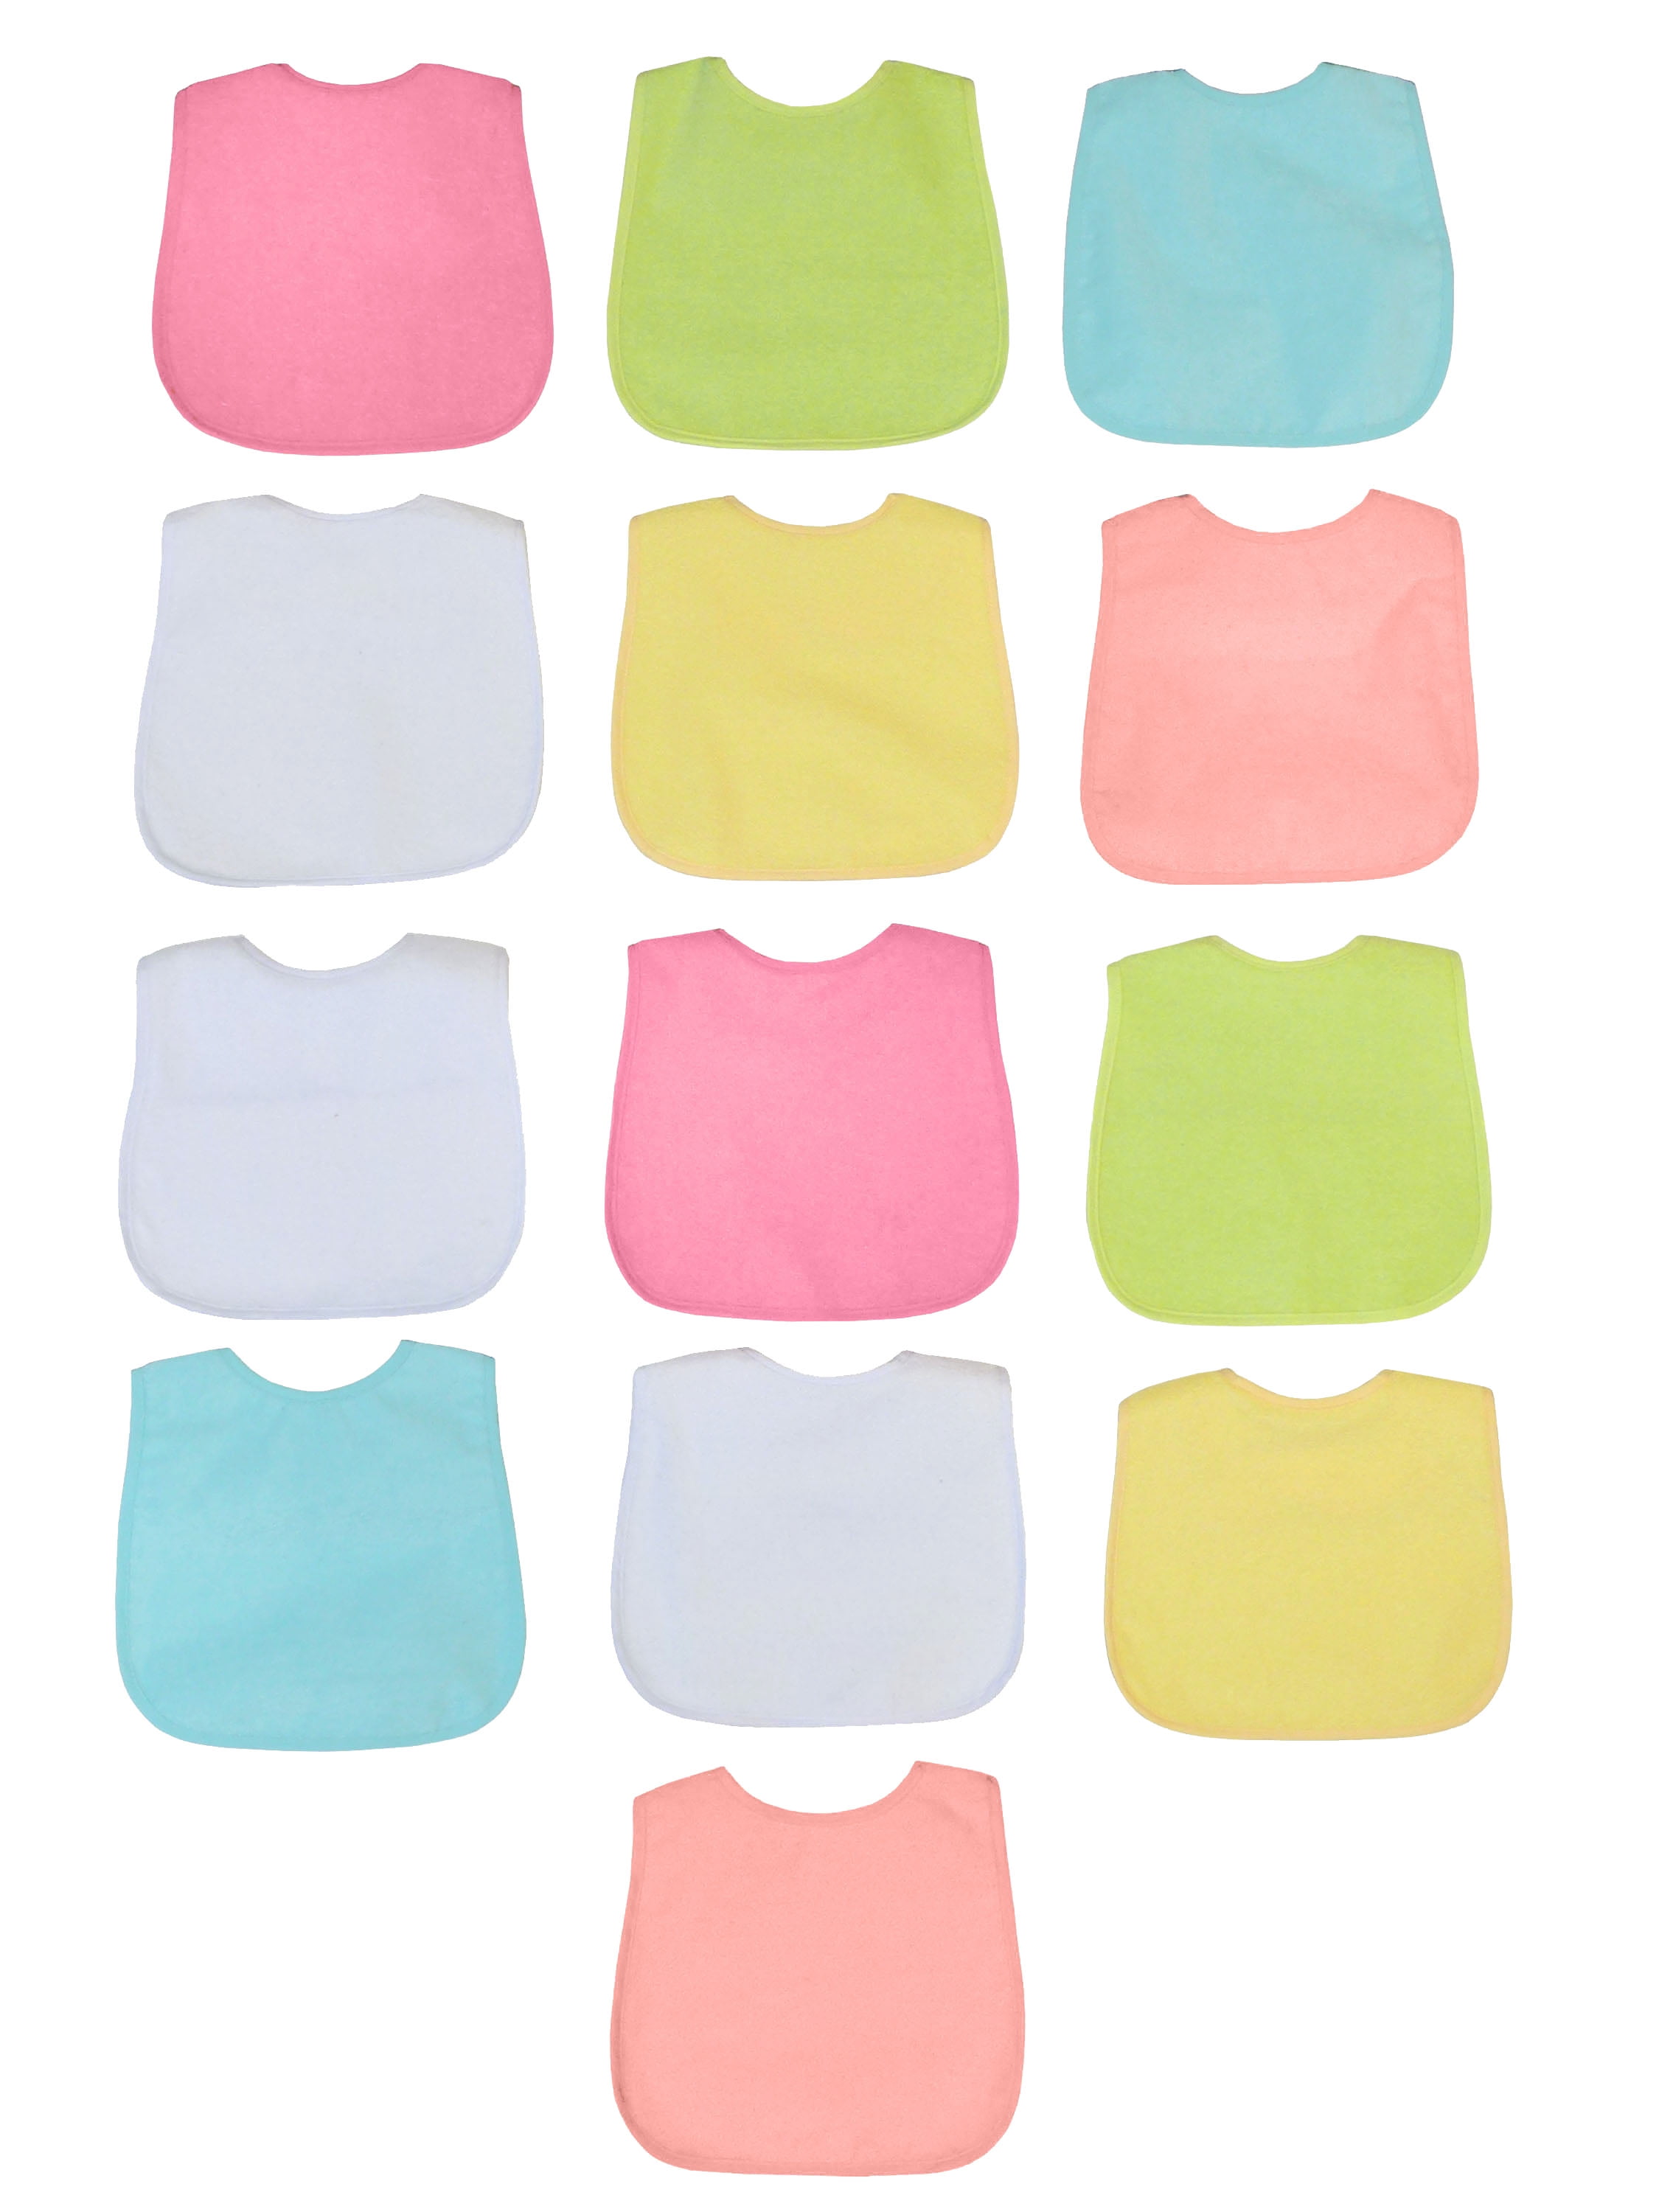 Parent's Choice Baby Girl Bibs, 13 Count Super Value Pack